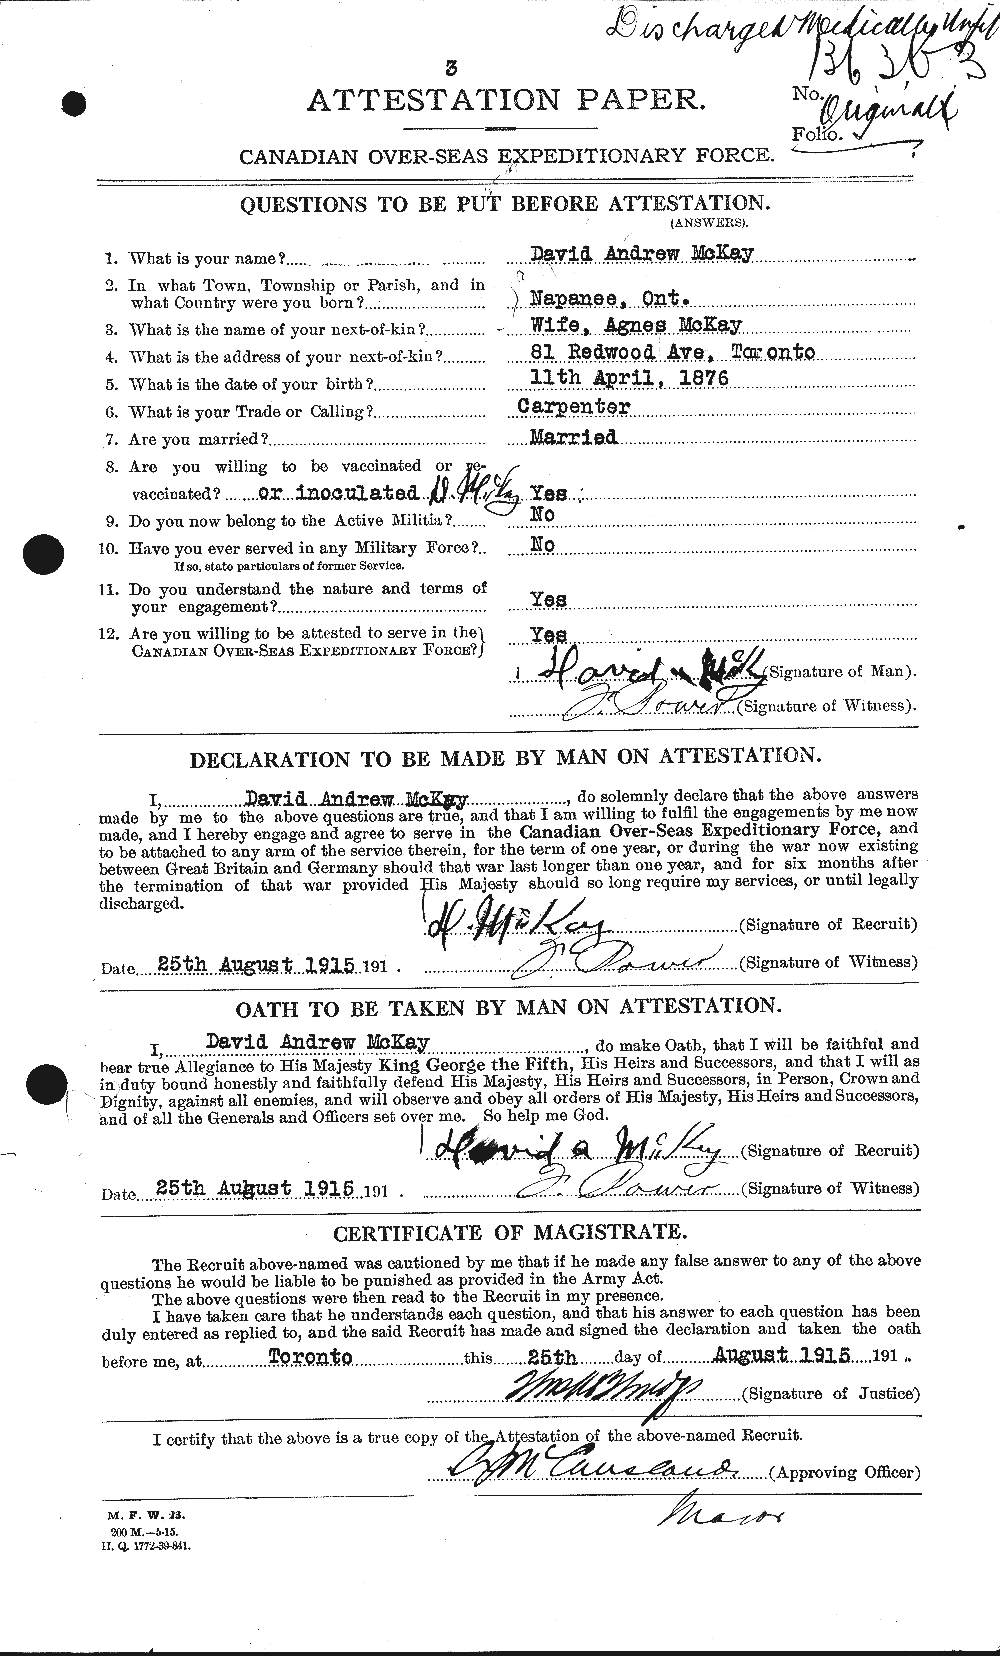 Personnel Records of the First World War - CEF 531137a